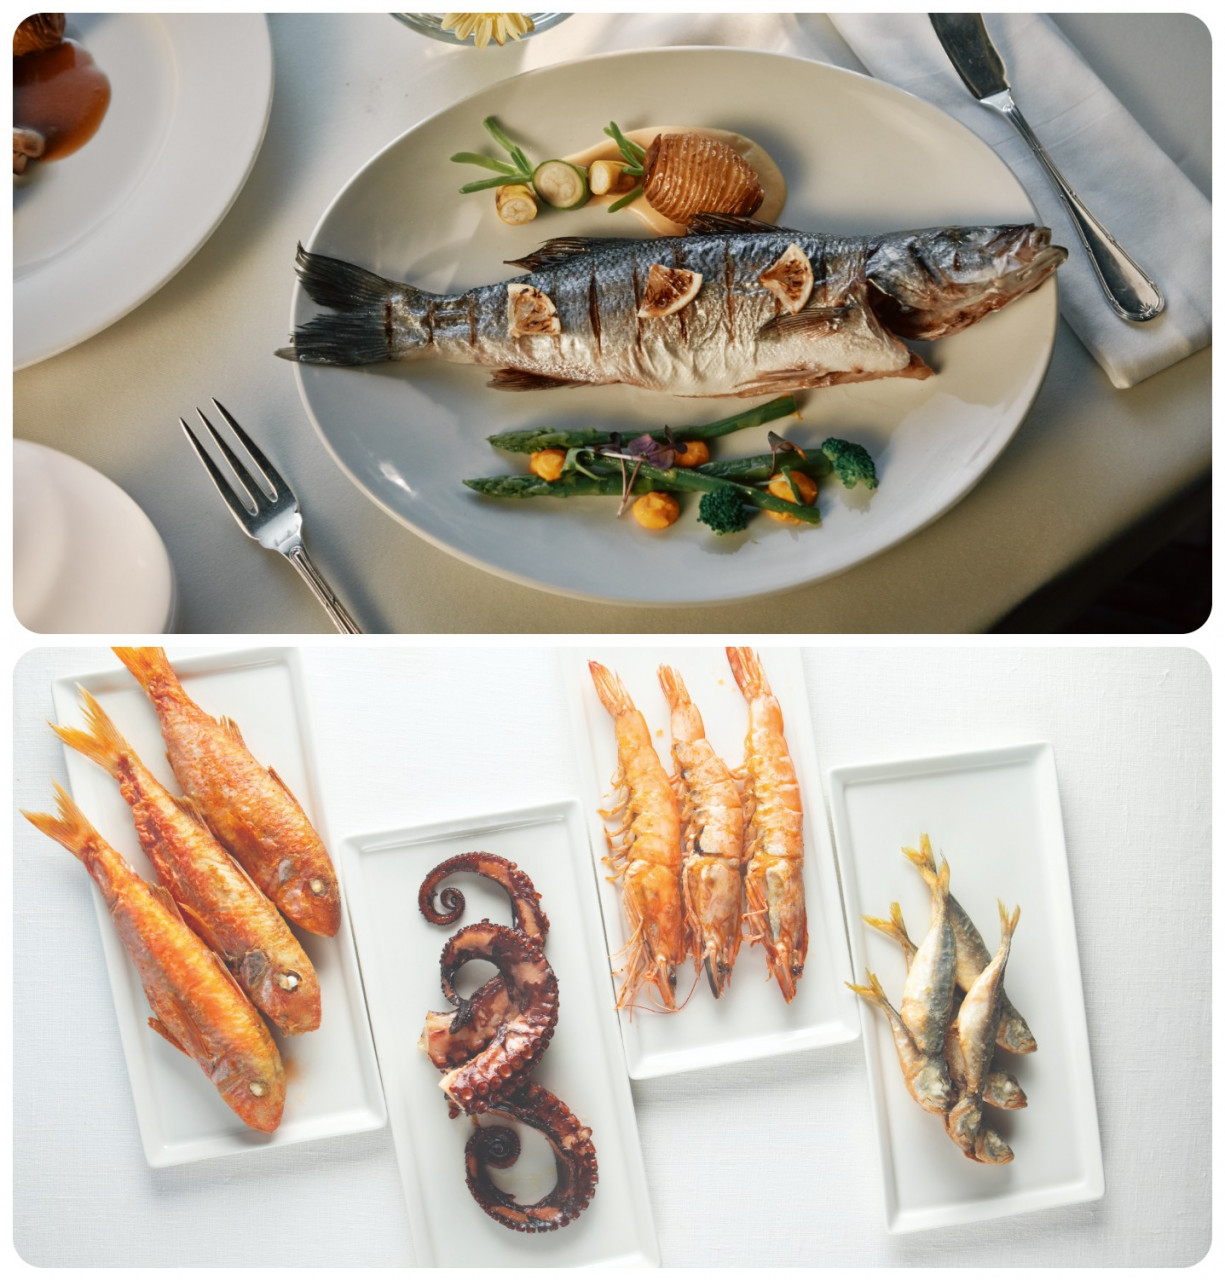 Just a sample of the many seafood options to be found in Istanbul. – Türkiye Tourism Promotion and Development Agency